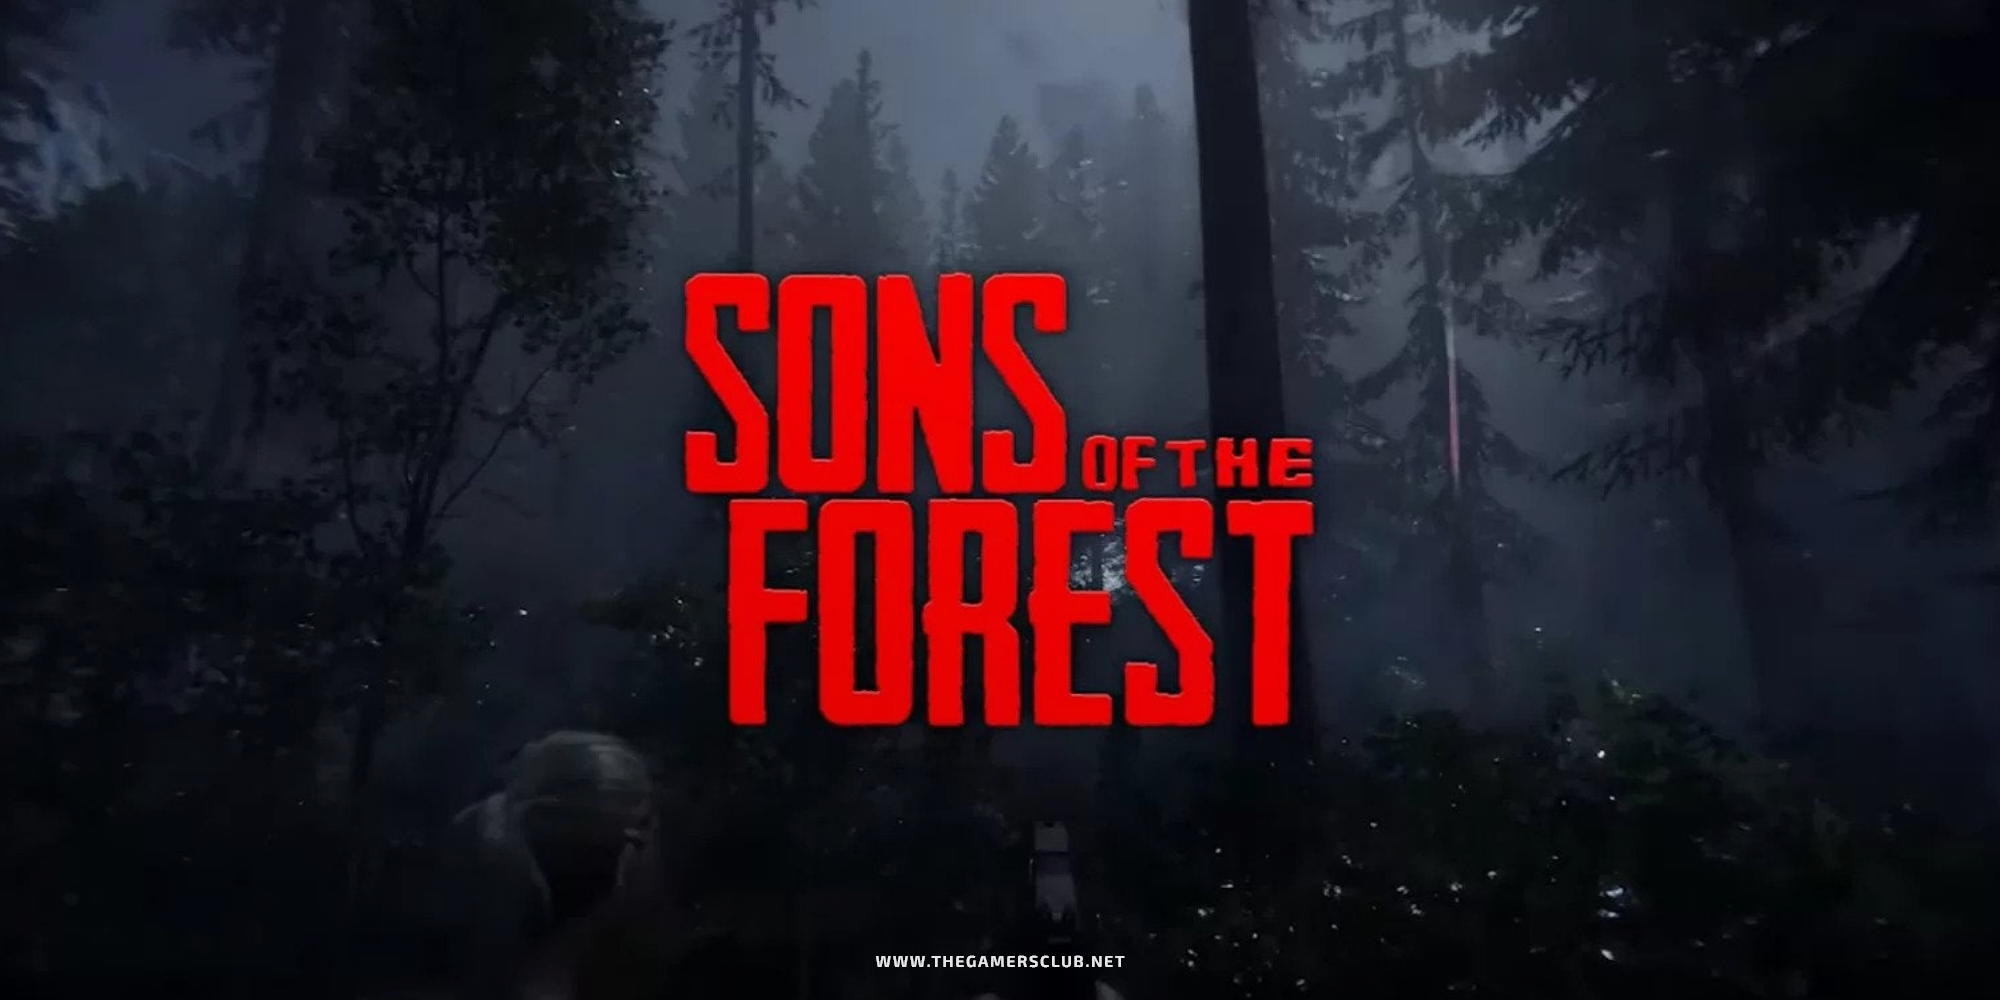 Sons of the Forest 10 Trailer Breakdown - The Gamers Club